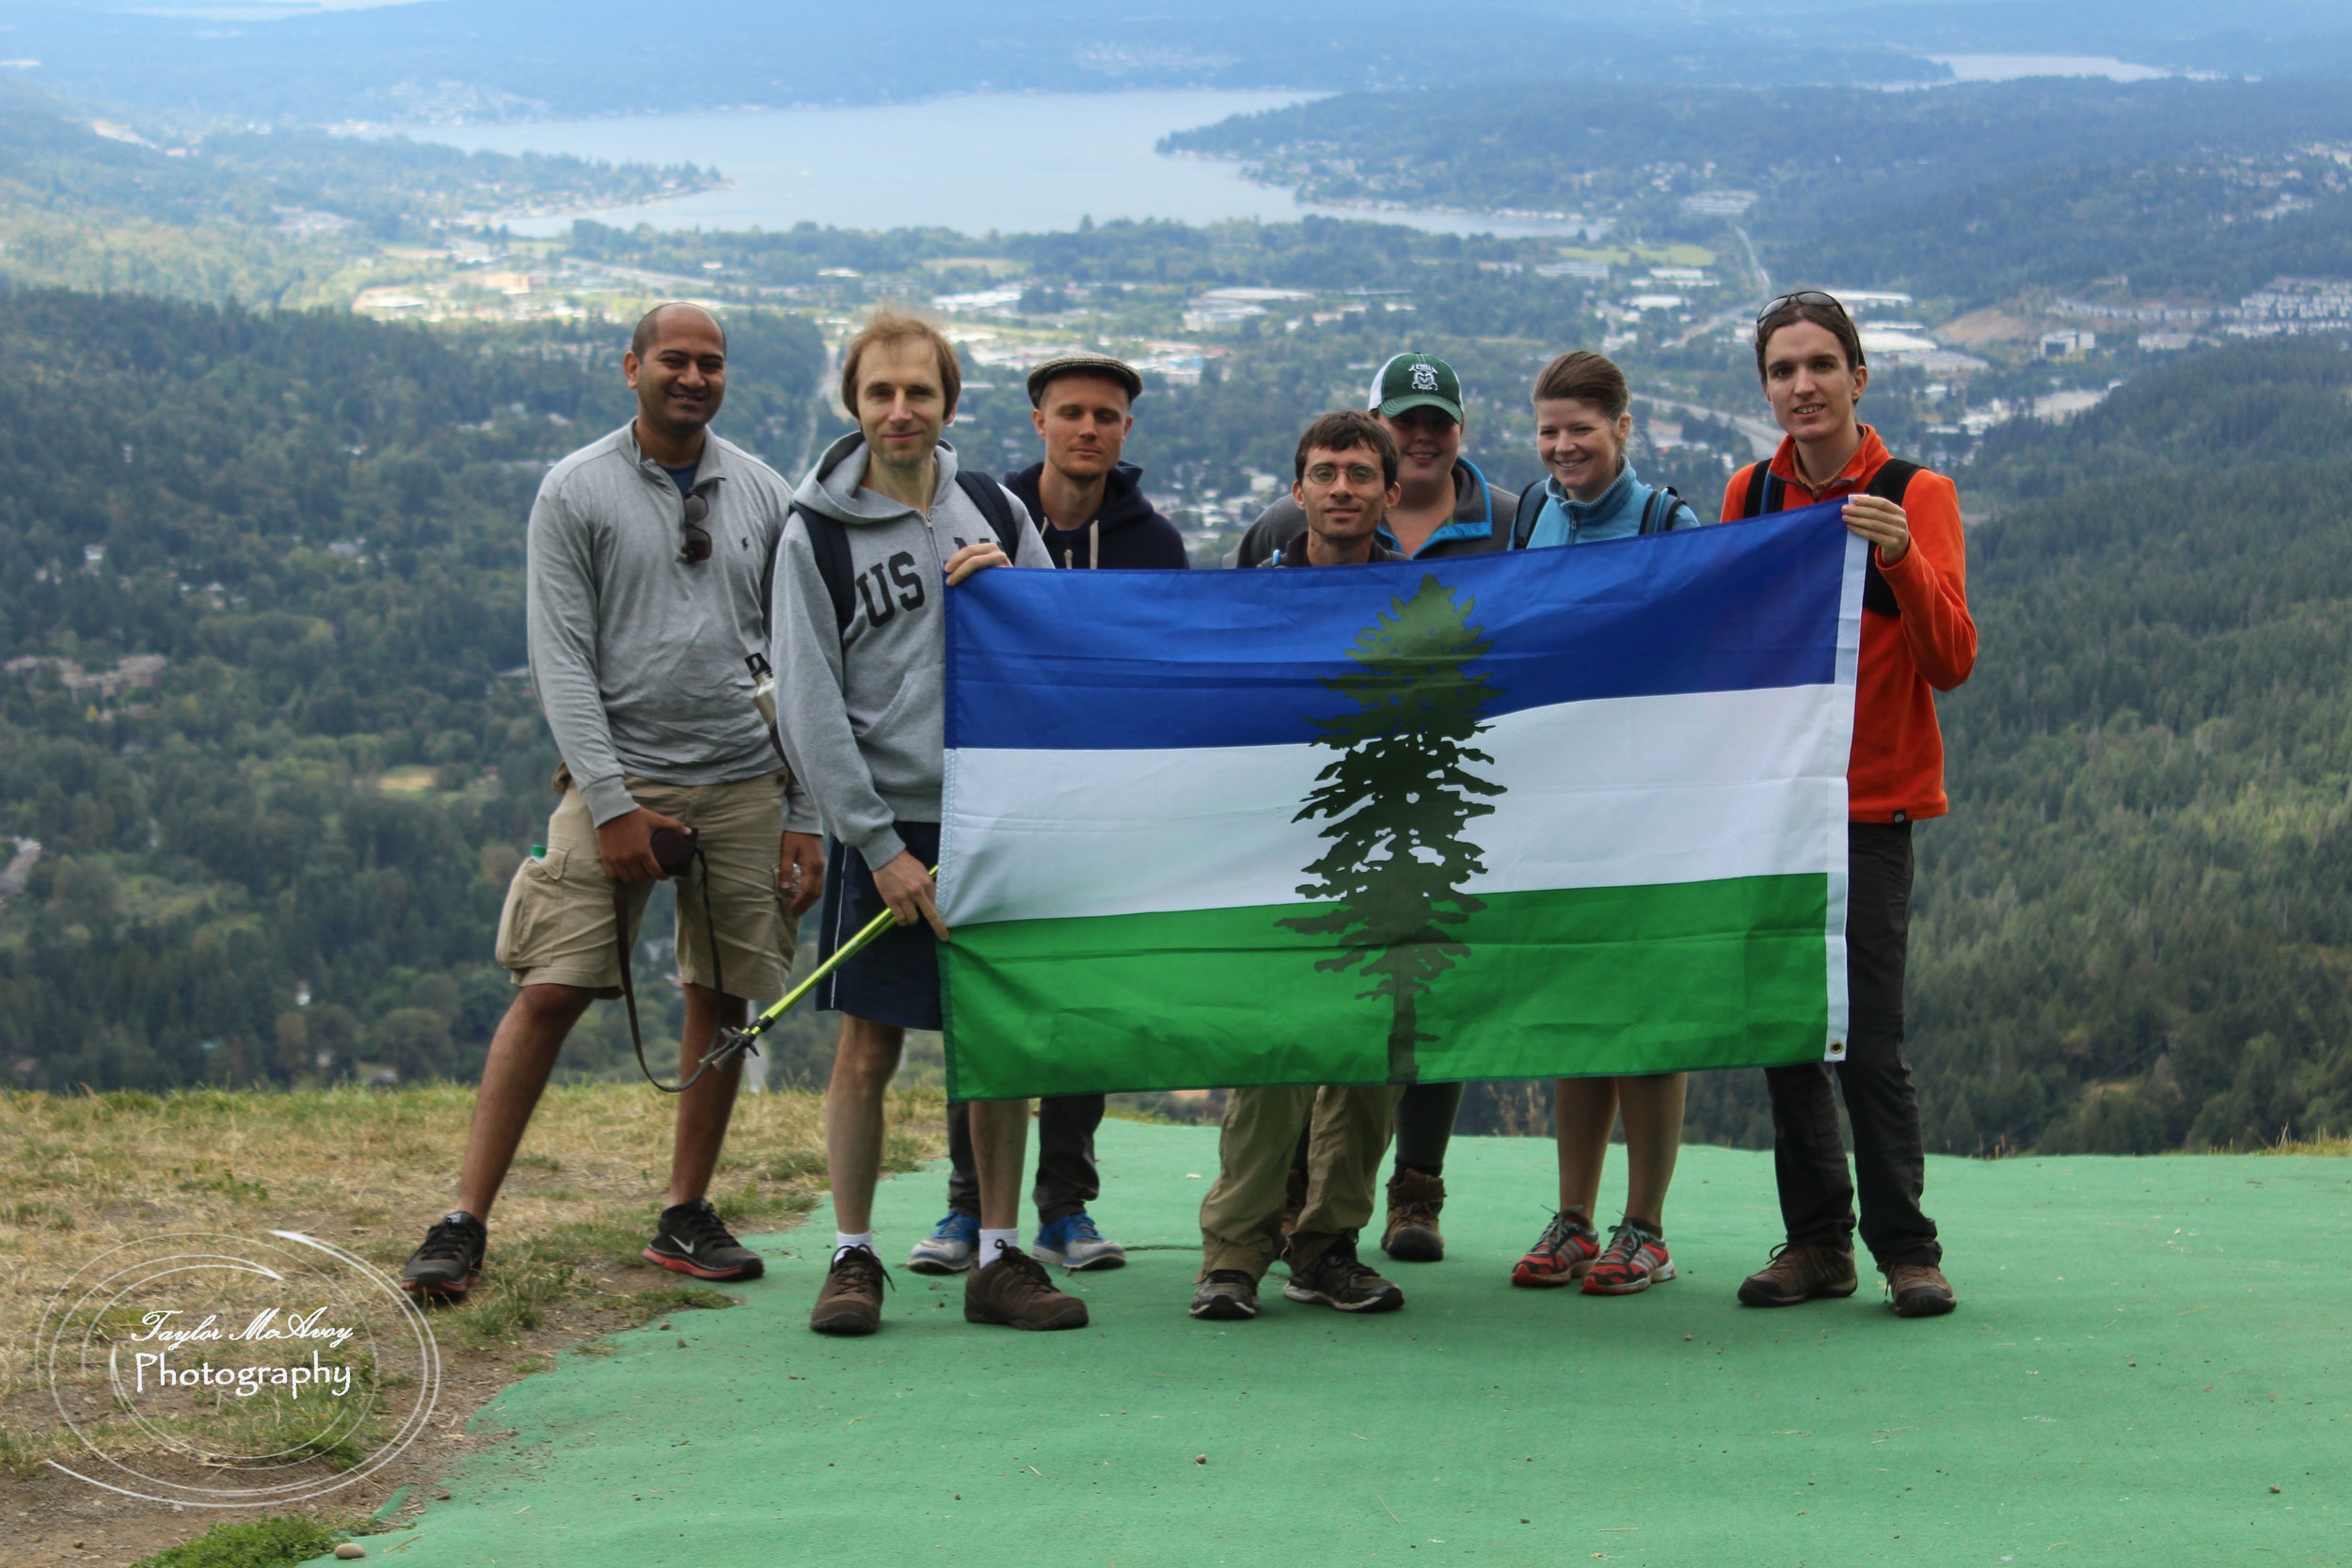   (from left to right) AAditya Juwad, Sergey Singov, AAron Perlmutter, Eric Feiveson, Emma Sparow, Caryl Bauwens, and Corey Ford joined TOTAGO and CascadiaNow! for a beautiful hike to Poo Poo Point near Issaquah, Wa.&nbsp;  